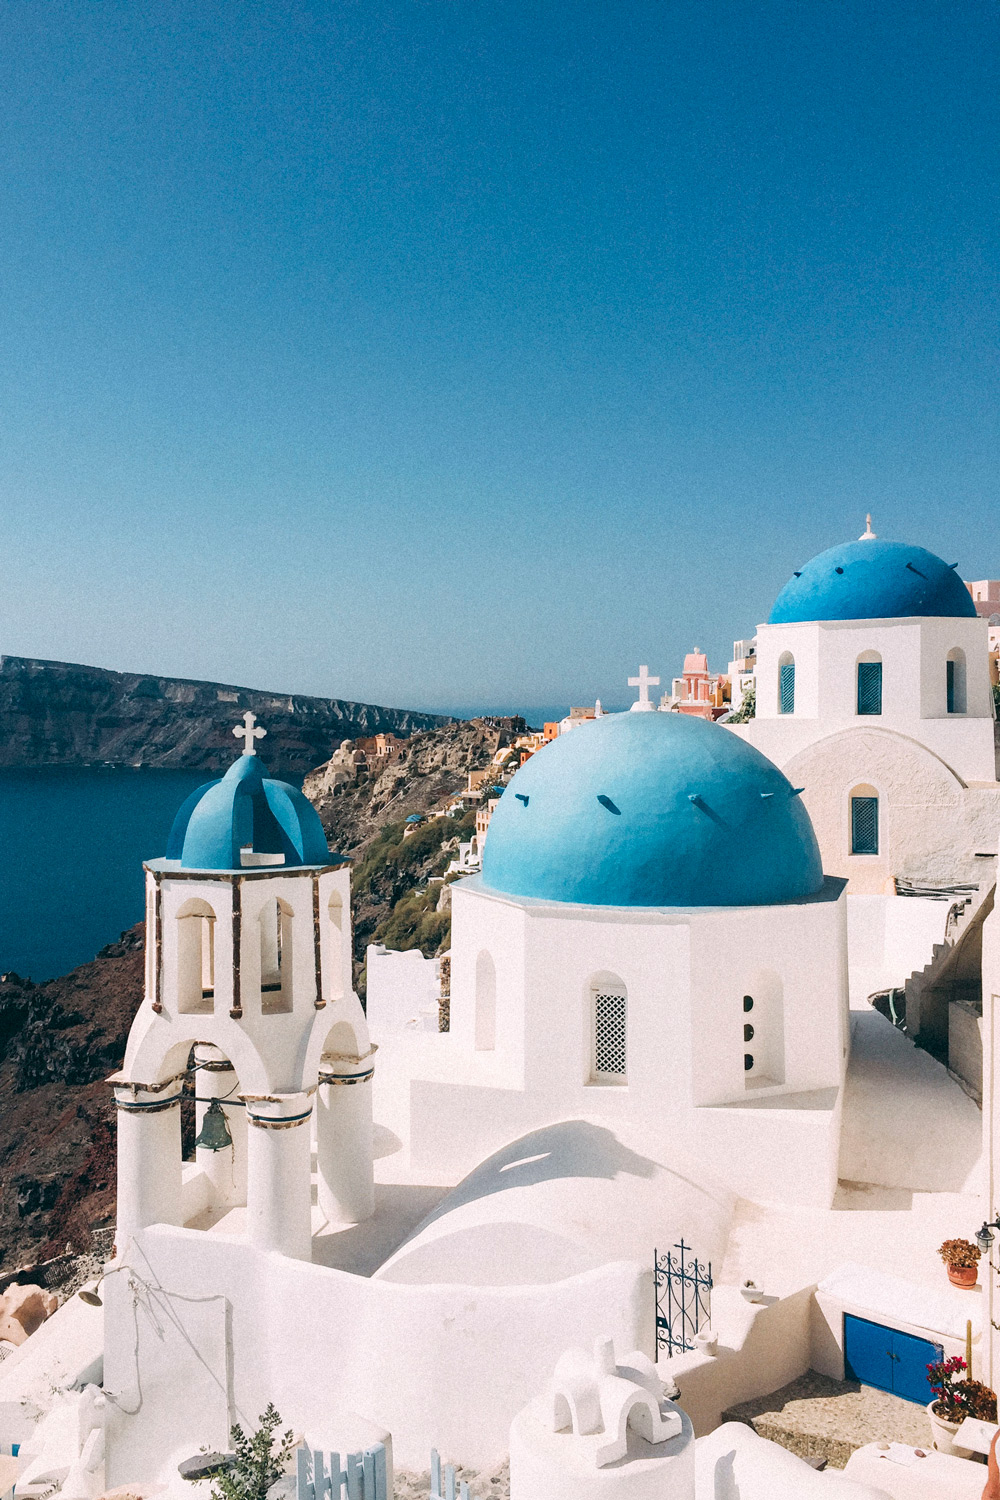 Dash of Darling shares her travels from Oia, Santorini Greece with Royal Caribbean Cruises.